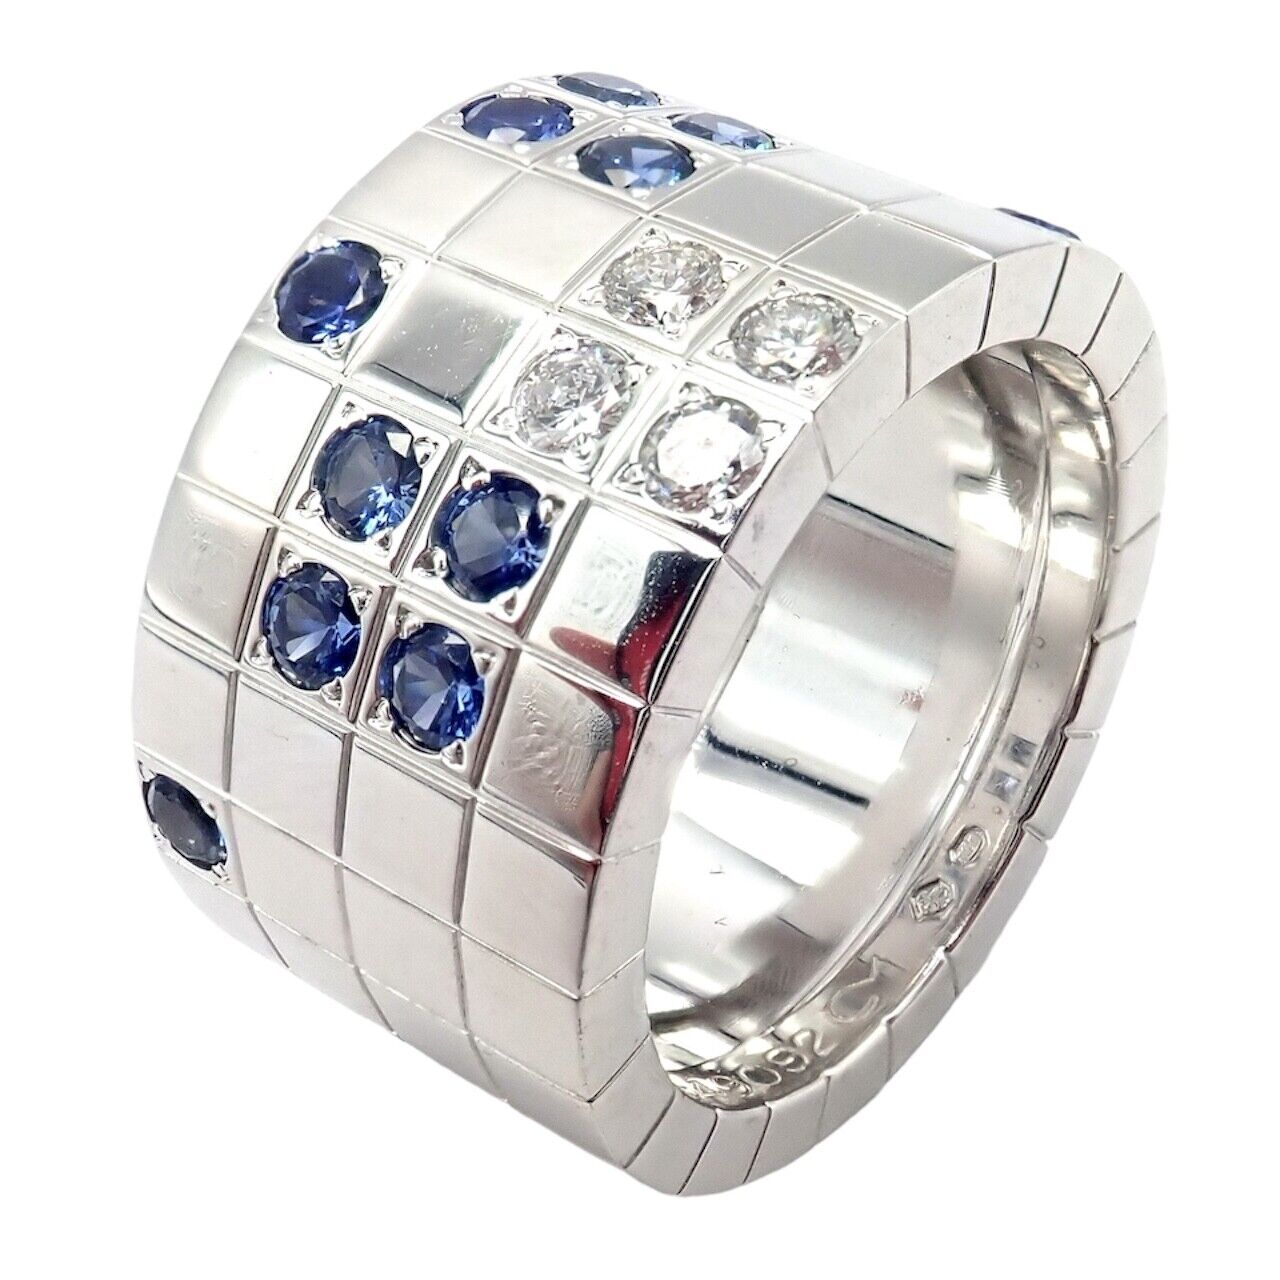 Cartier Jewelry & Watches:Fine Jewelry:Rings Cartier 18k White Gold Lanieres Diamond Blue Sapphire Wide Band Ring 2004 6.75